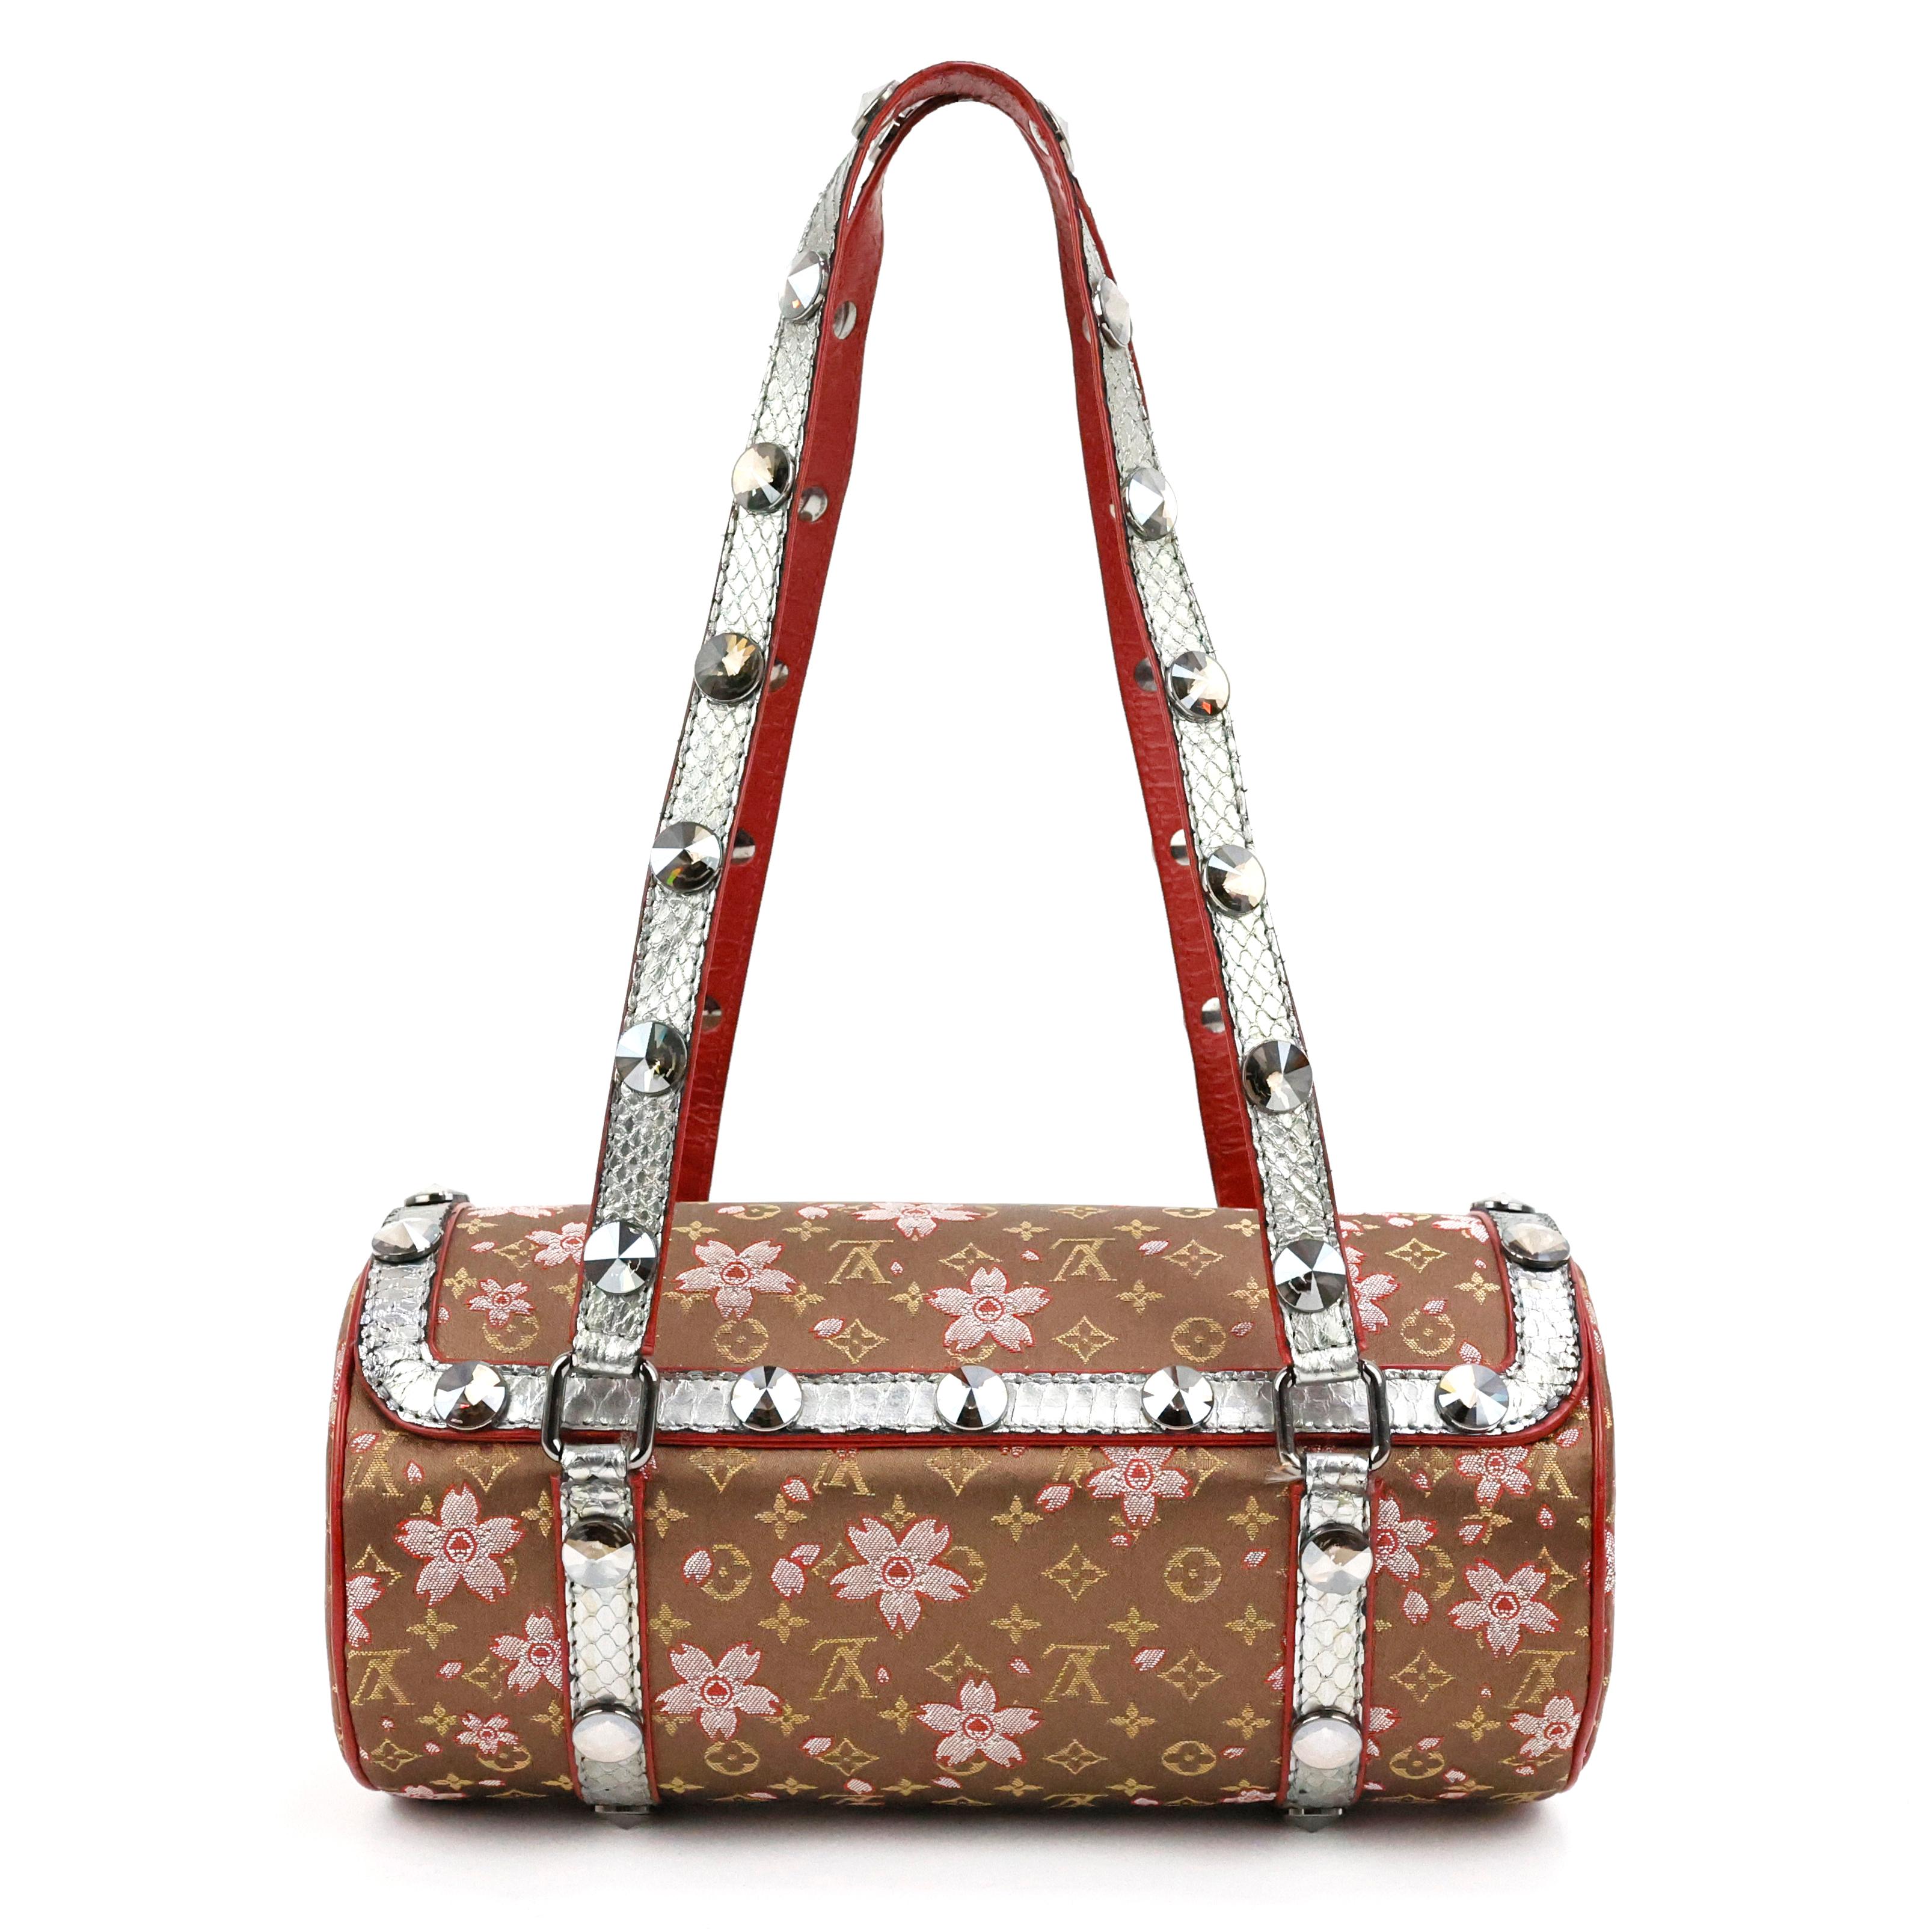 Rare Louis Vuitton Cherry Blossom Papillon monogram bag in satin and python leather.

Condition:
Really good.

Packing/accessories:
Box, shopping bag, dustbag.

Measurements:
21,5cm x 10cm x 10cm